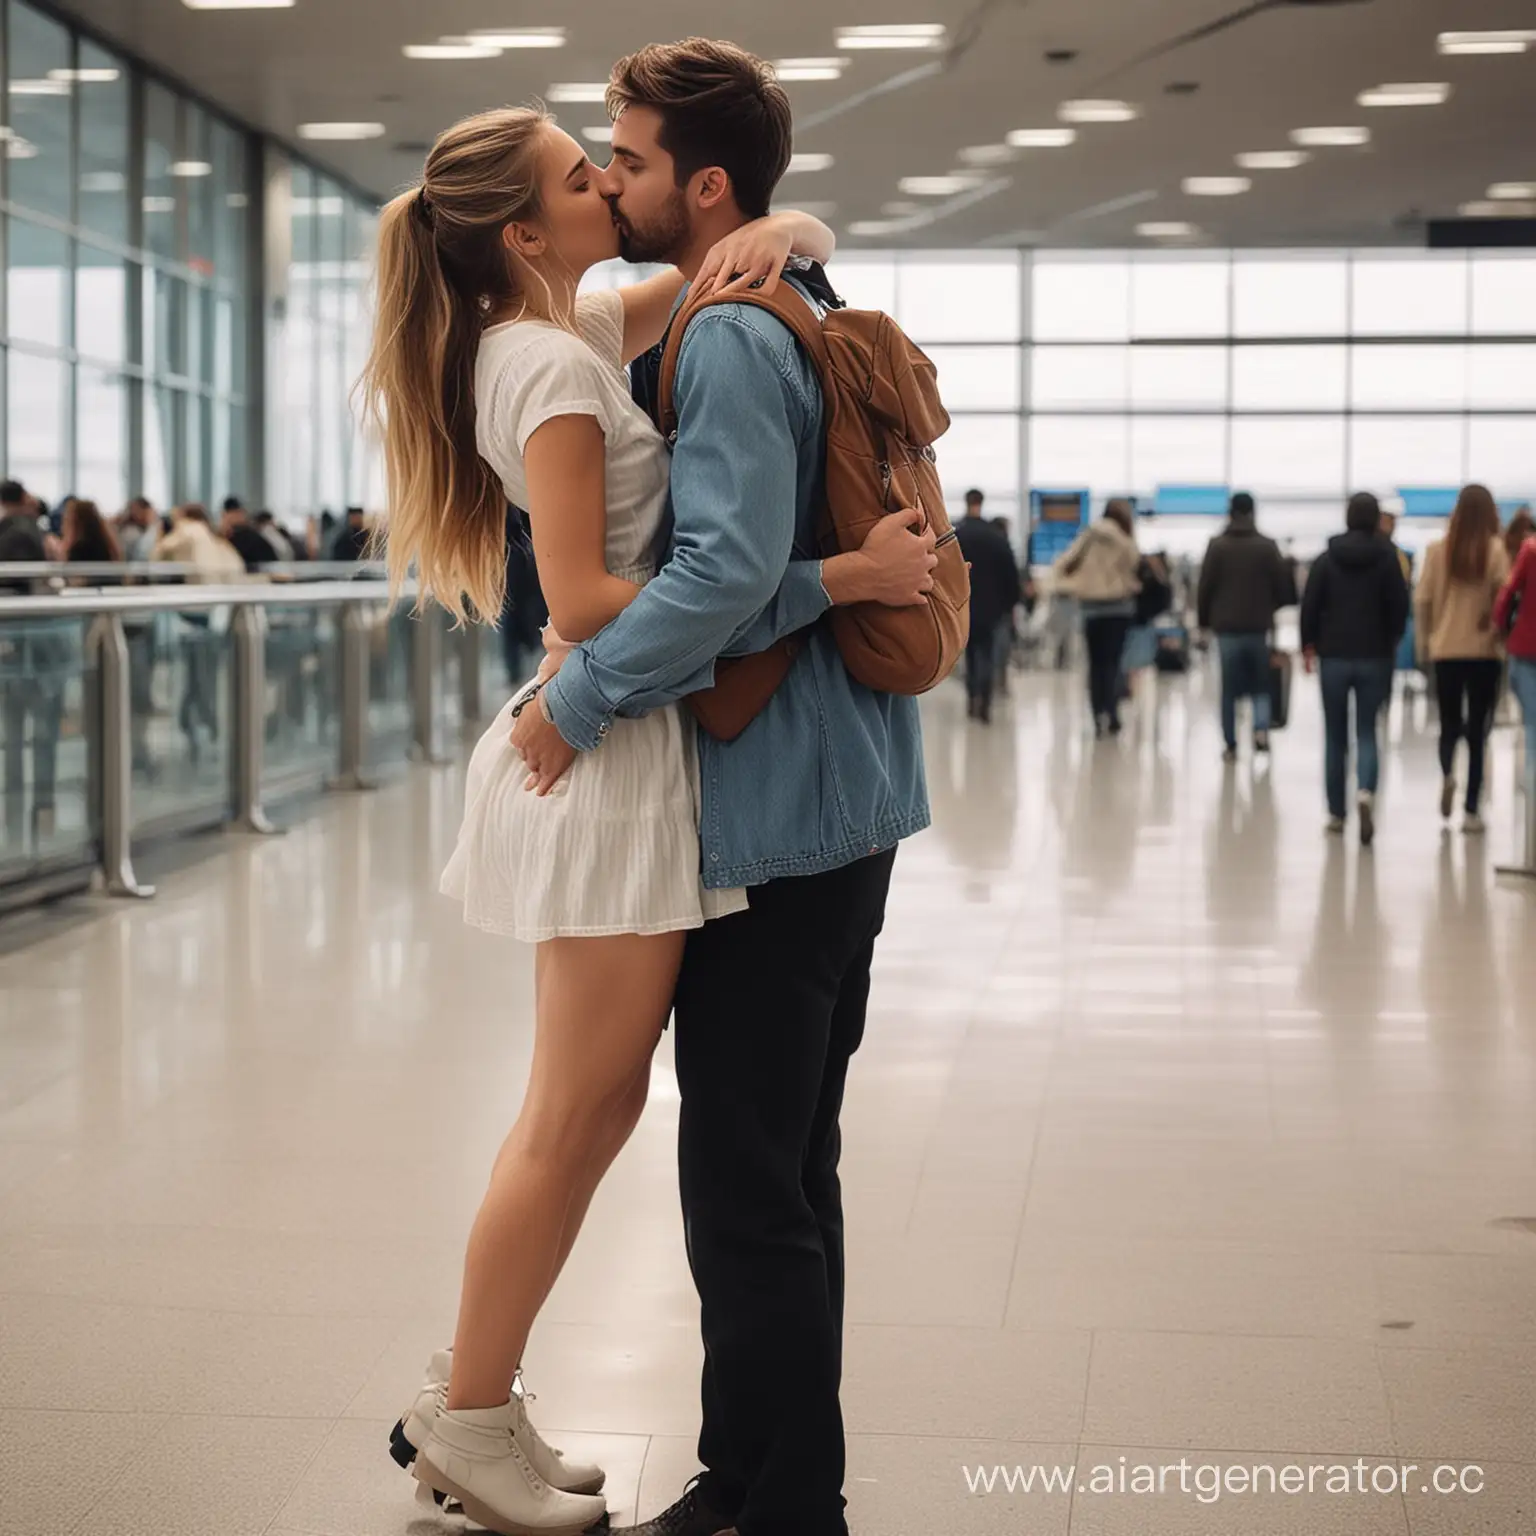 the guy is waiting for the girl at the airport. When she comes and sees him, she throws things on the ground and runs to him. She hugs him tightly around the neck, and he holds her tightly by the waist and kisses her.